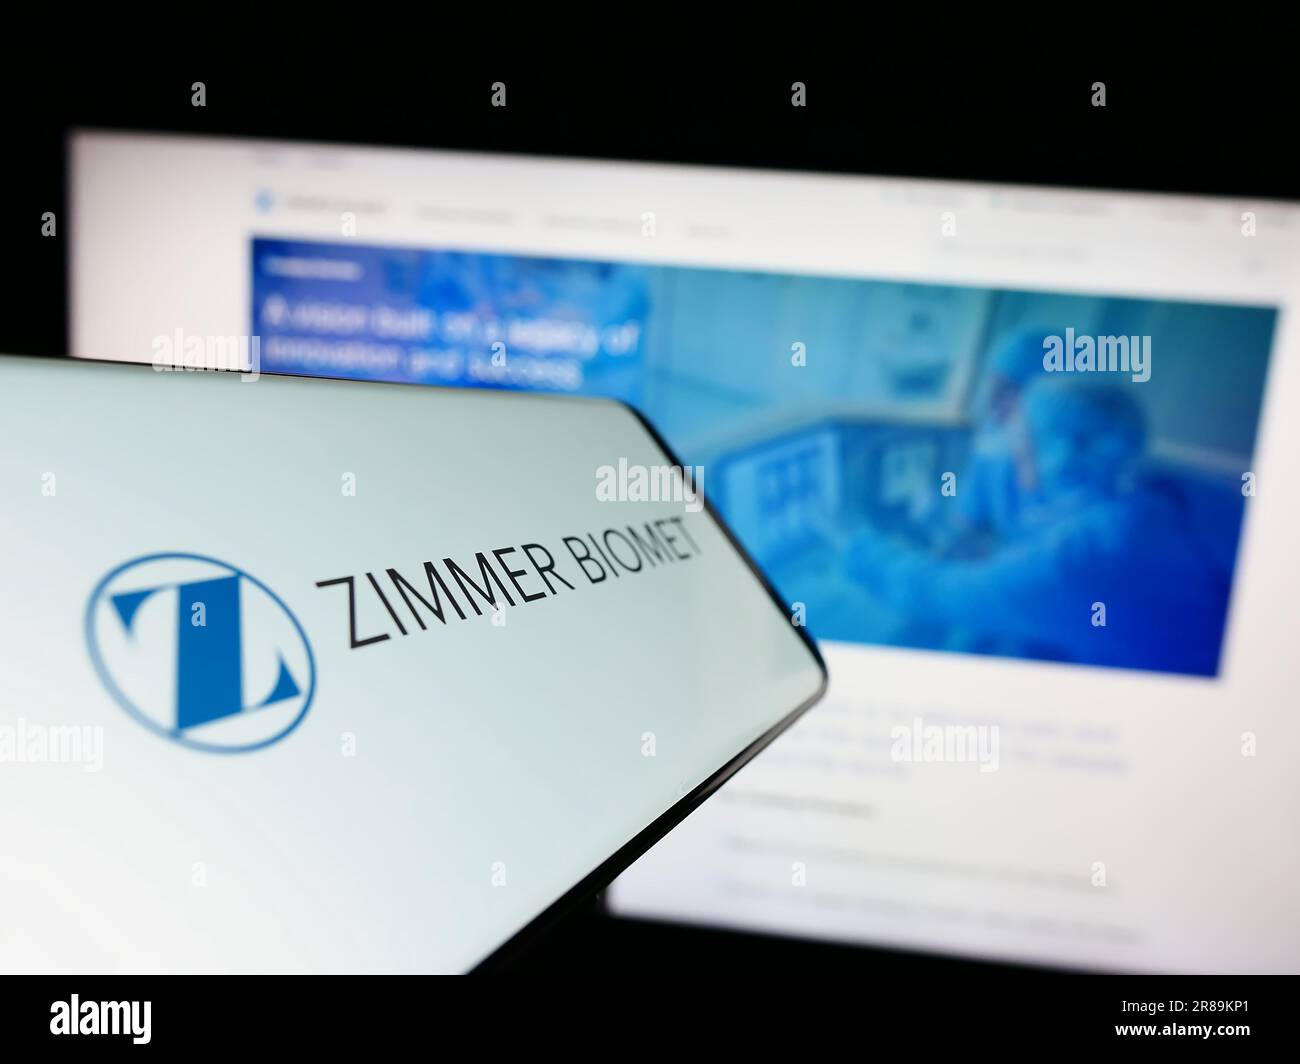 Smartphone with logo of American company Zimmer Biomet Holdings Inc. on screen in front of website. Focus on center-right of phone display. Stock Photo